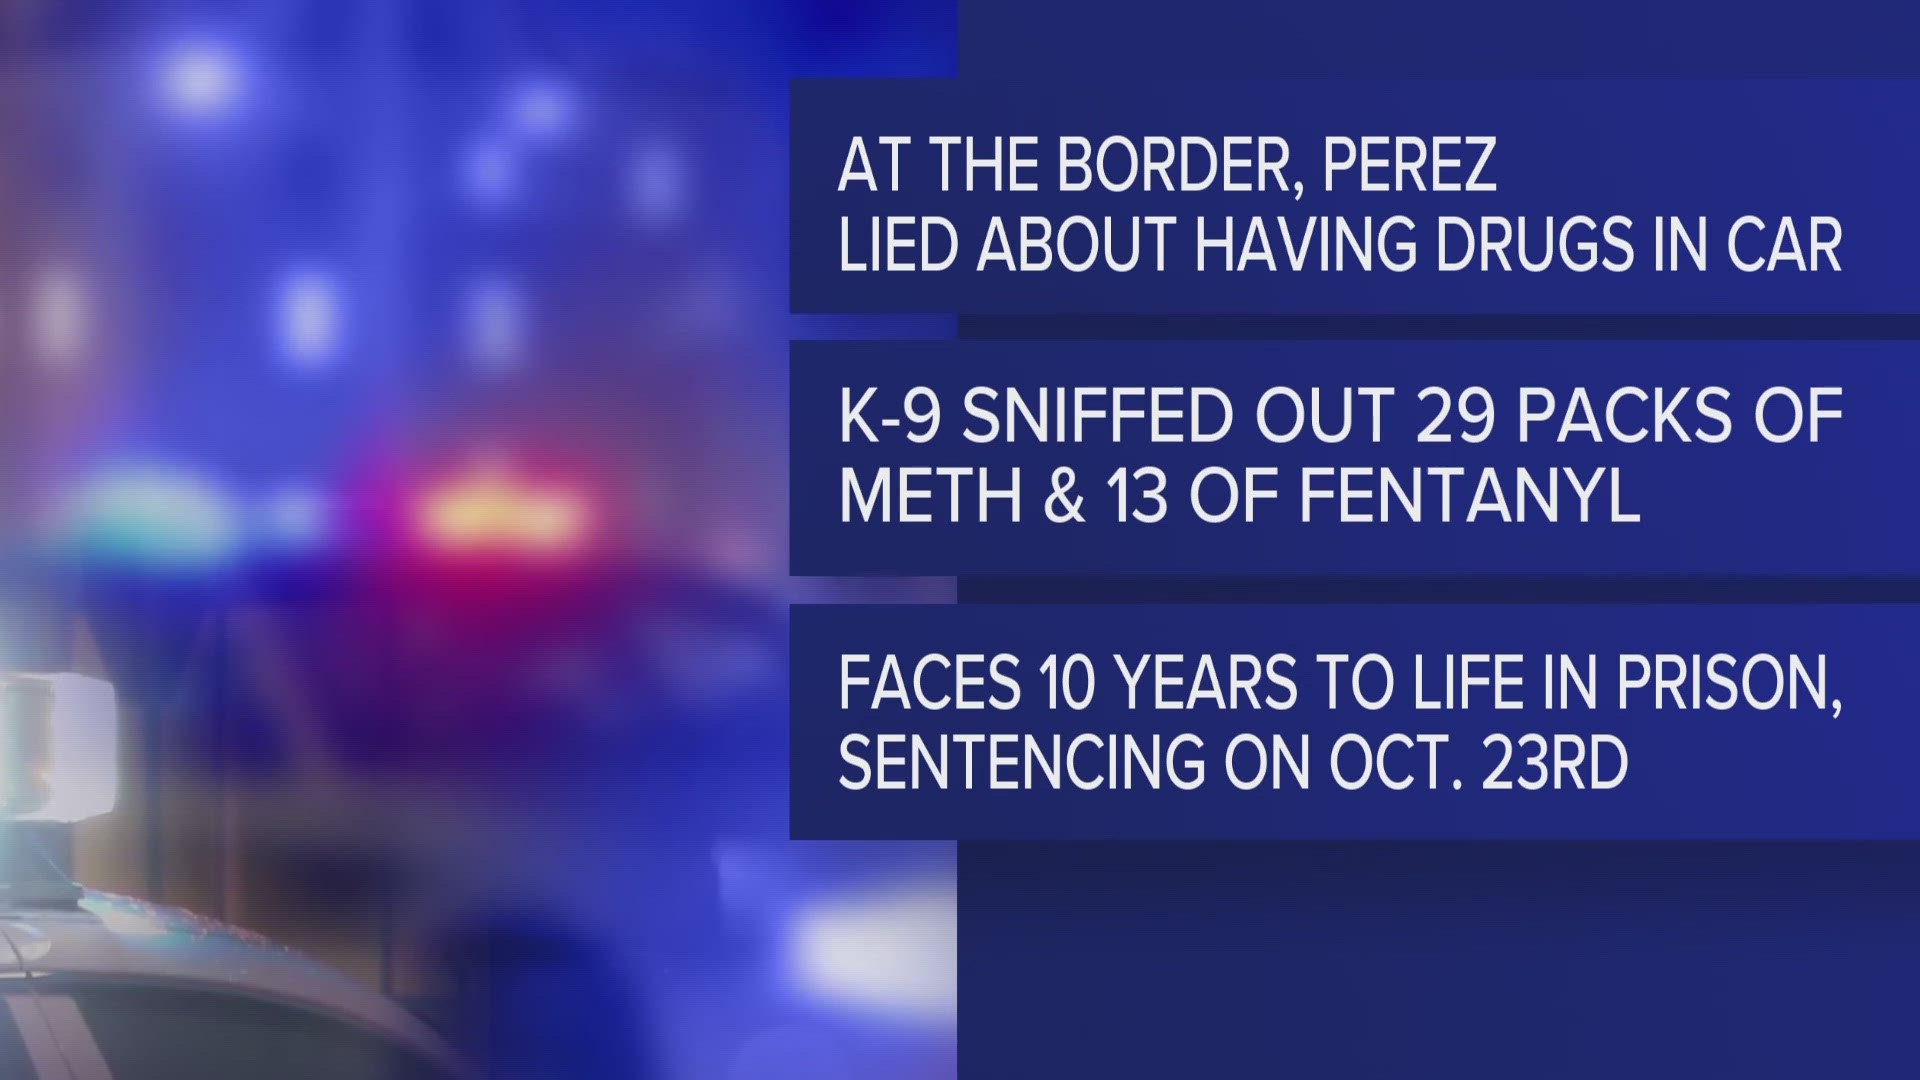 Cherakee Lee Perez, 33, was caught attempting to cross the Texas-Mexico border with several kilograms of methamphetamine and fentanyl.